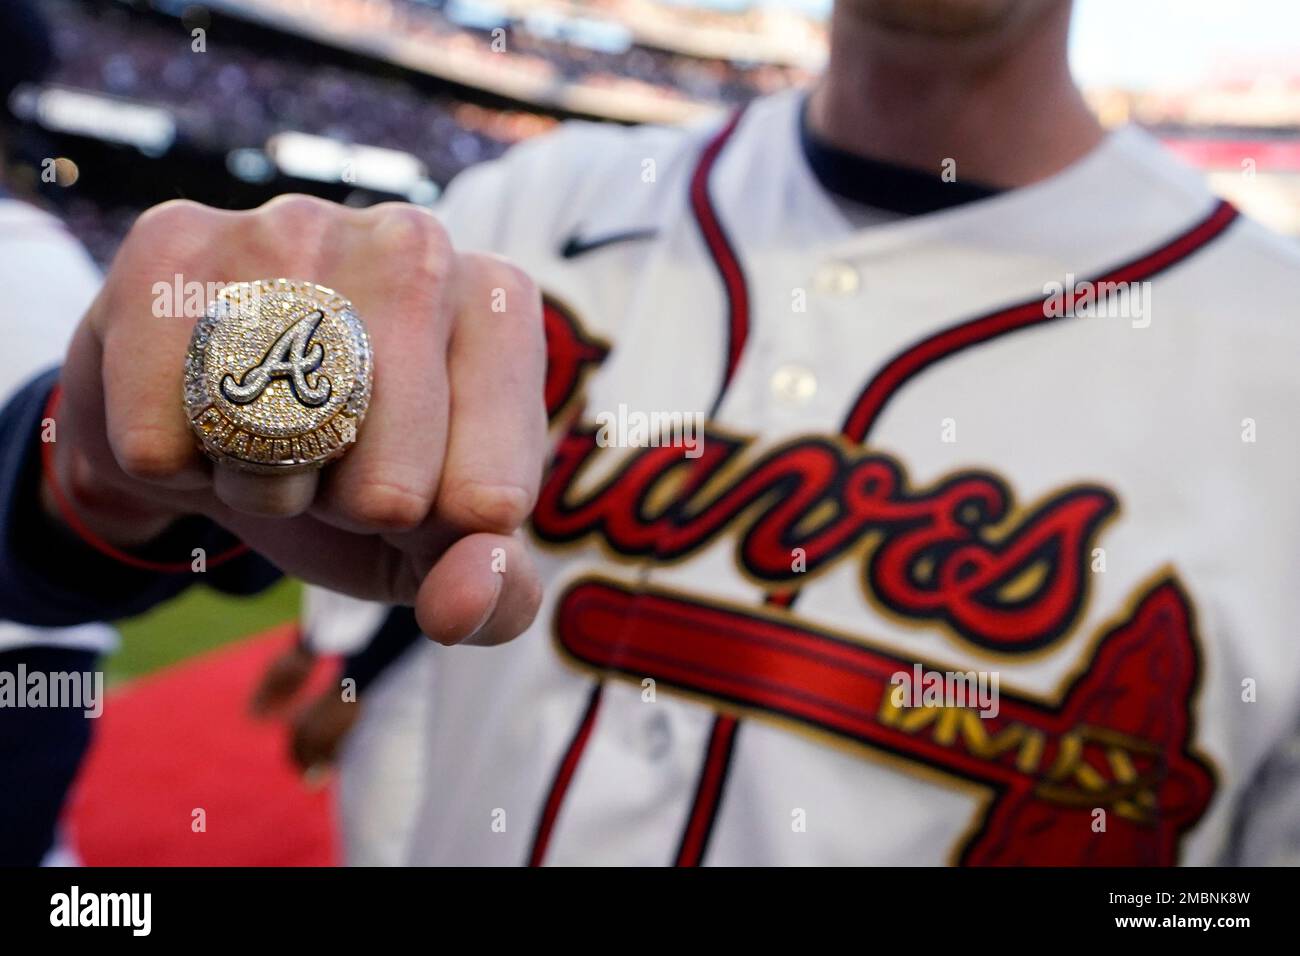 Photos: Champion Braves get their rings, defeat Reds